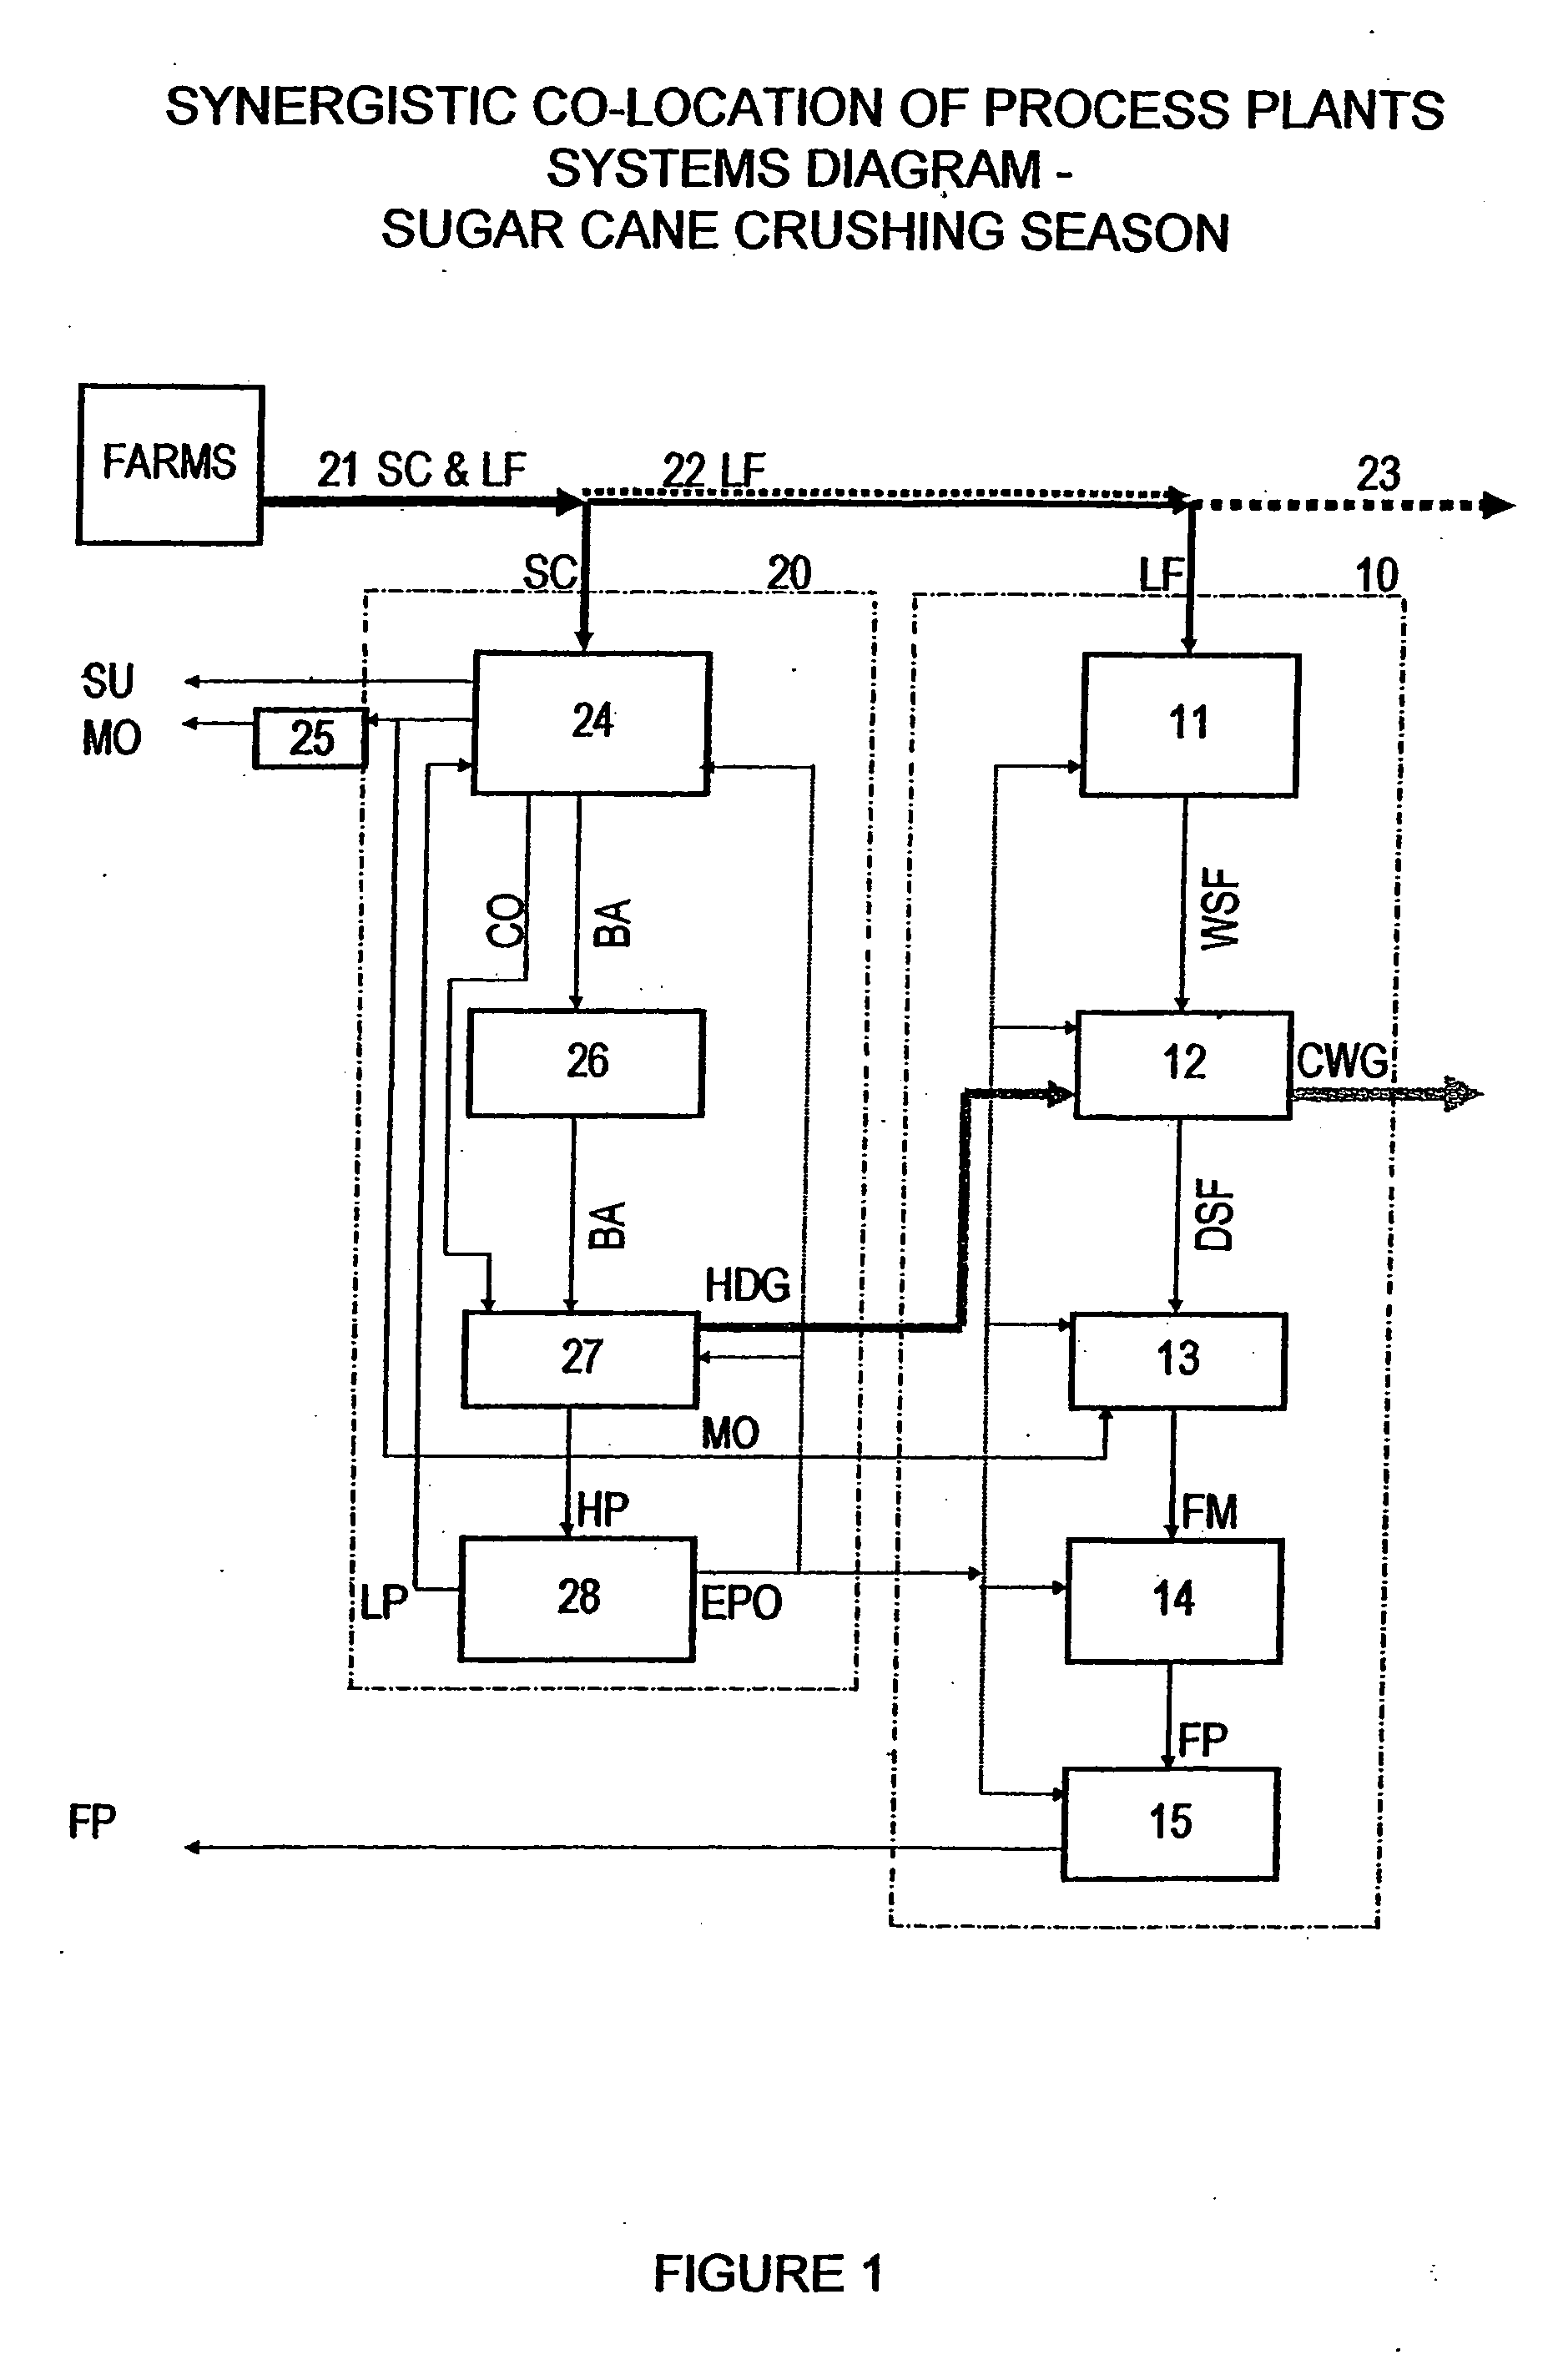 Synergistic co-location of process plants